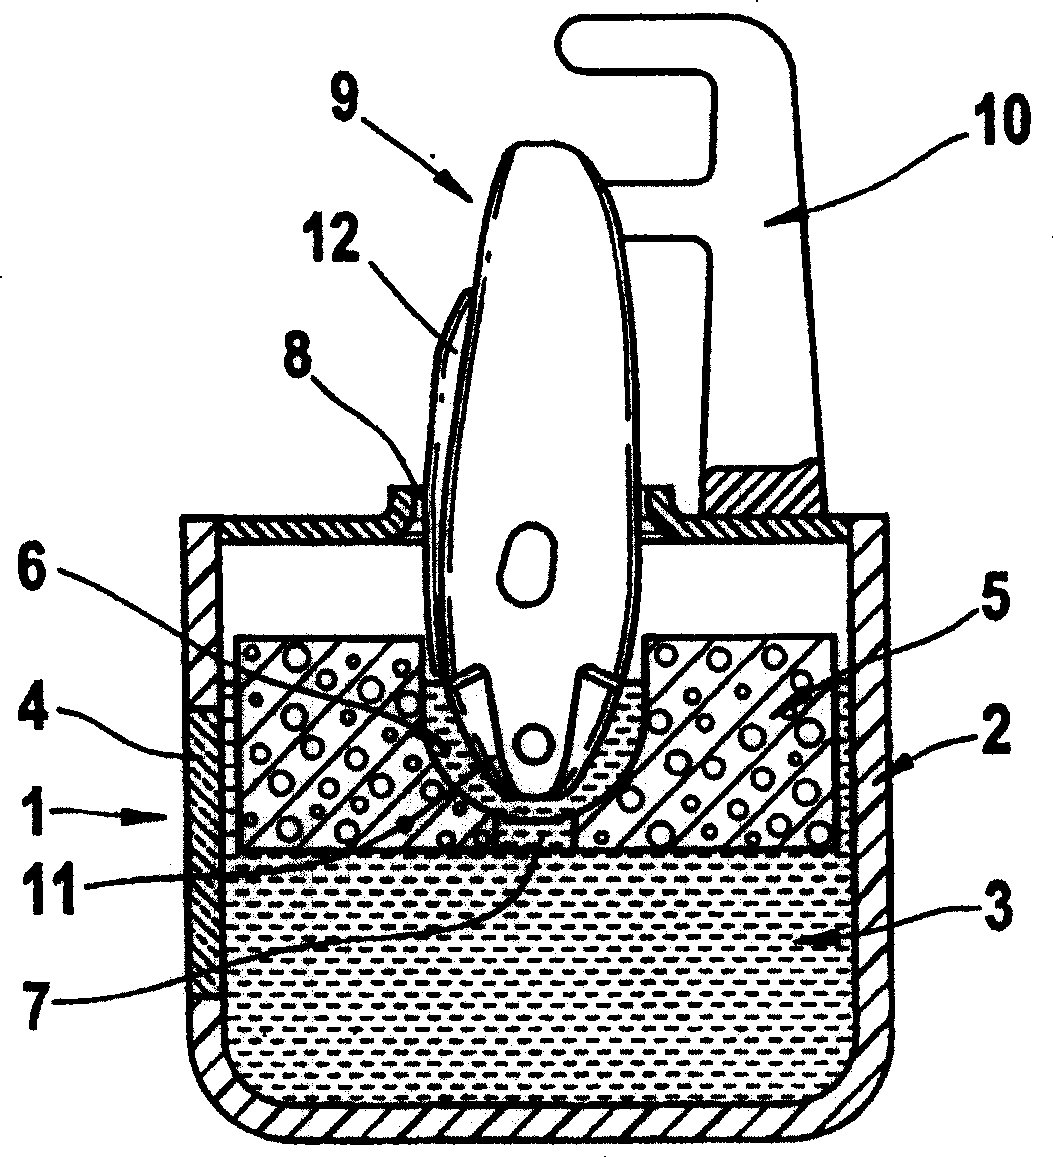 A cleaning device used in shavers